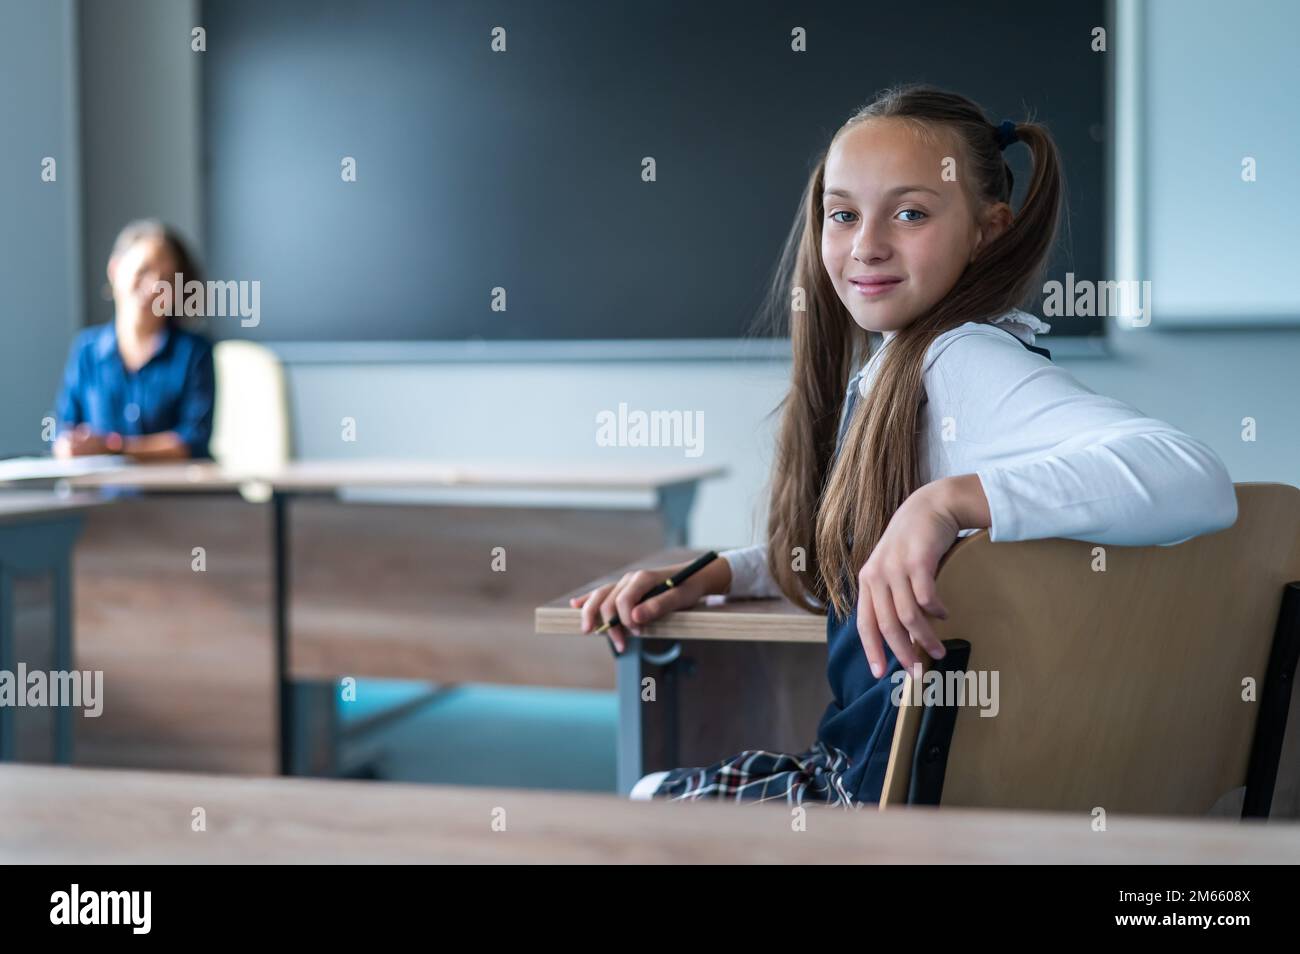 Caucasian girl and her teacher in the classroom. Schoolgirl turns around and looks at the camera.  Stock Photo